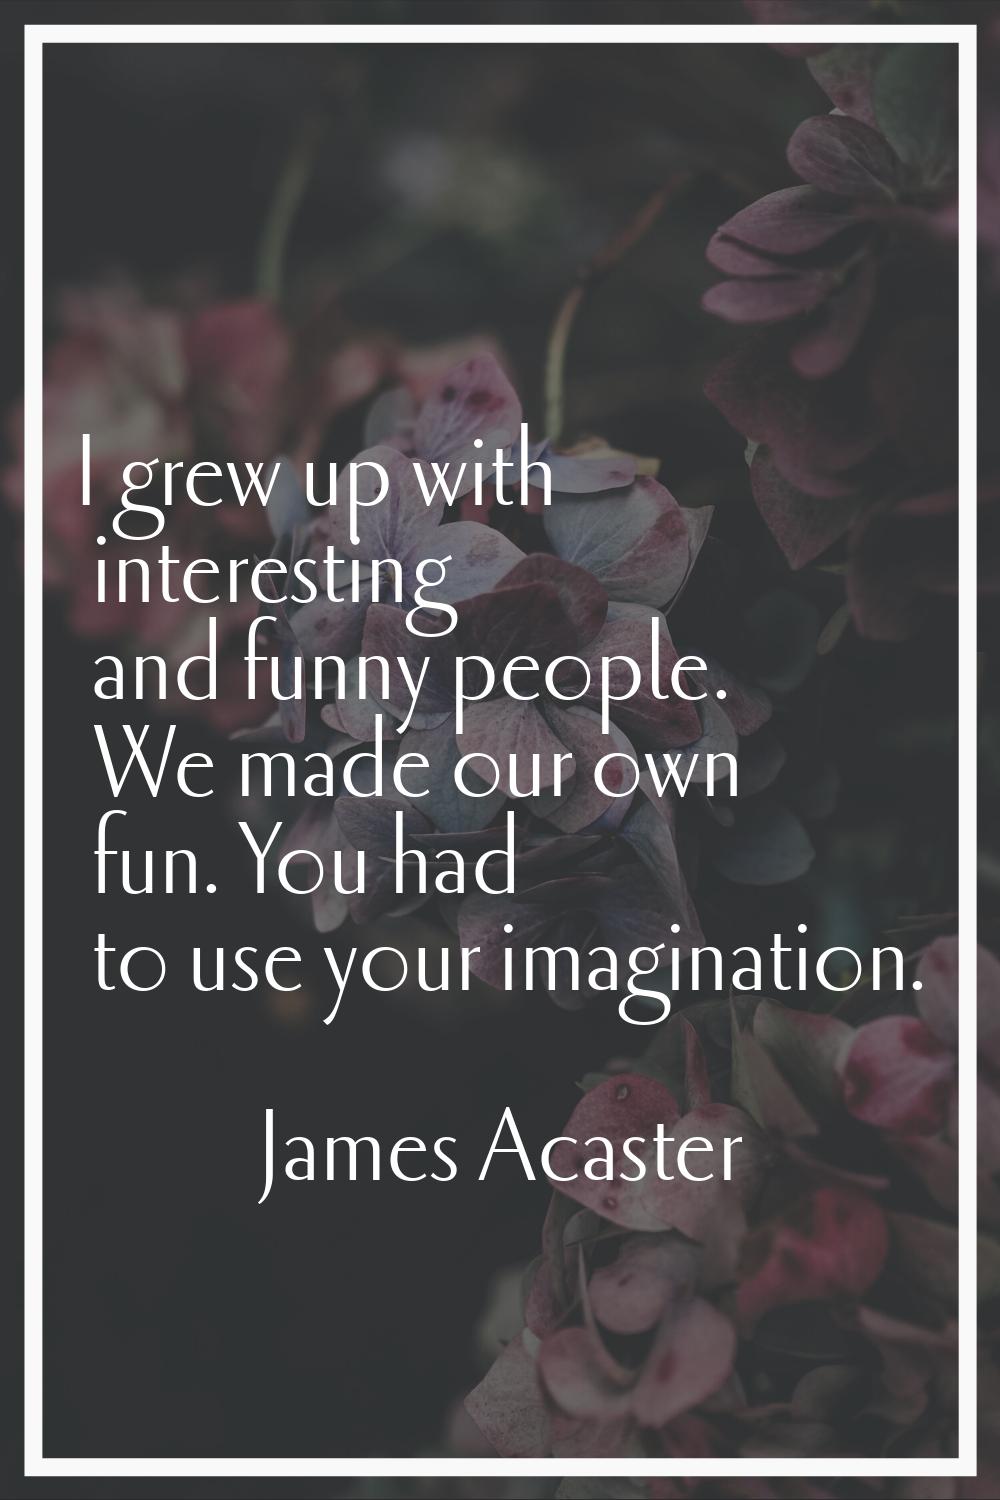 I grew up with interesting and funny people. We made our own fun. You had to use your imagination.